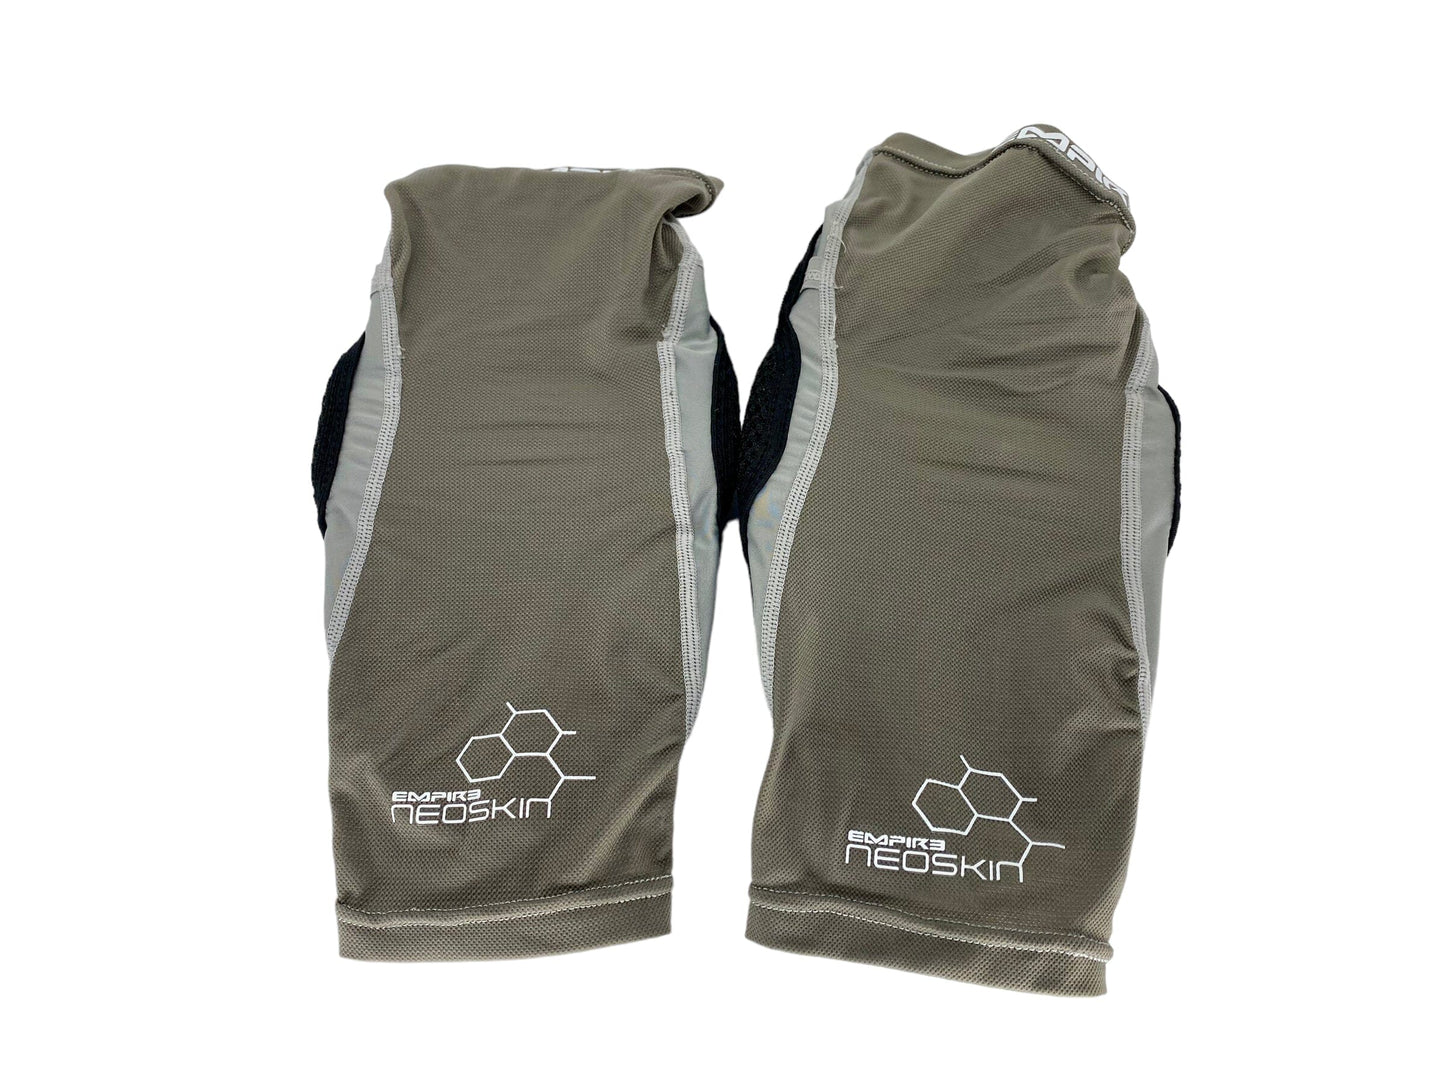 Used Empire Neoskin Knee Pads Size Large CPXBrosPaintball 